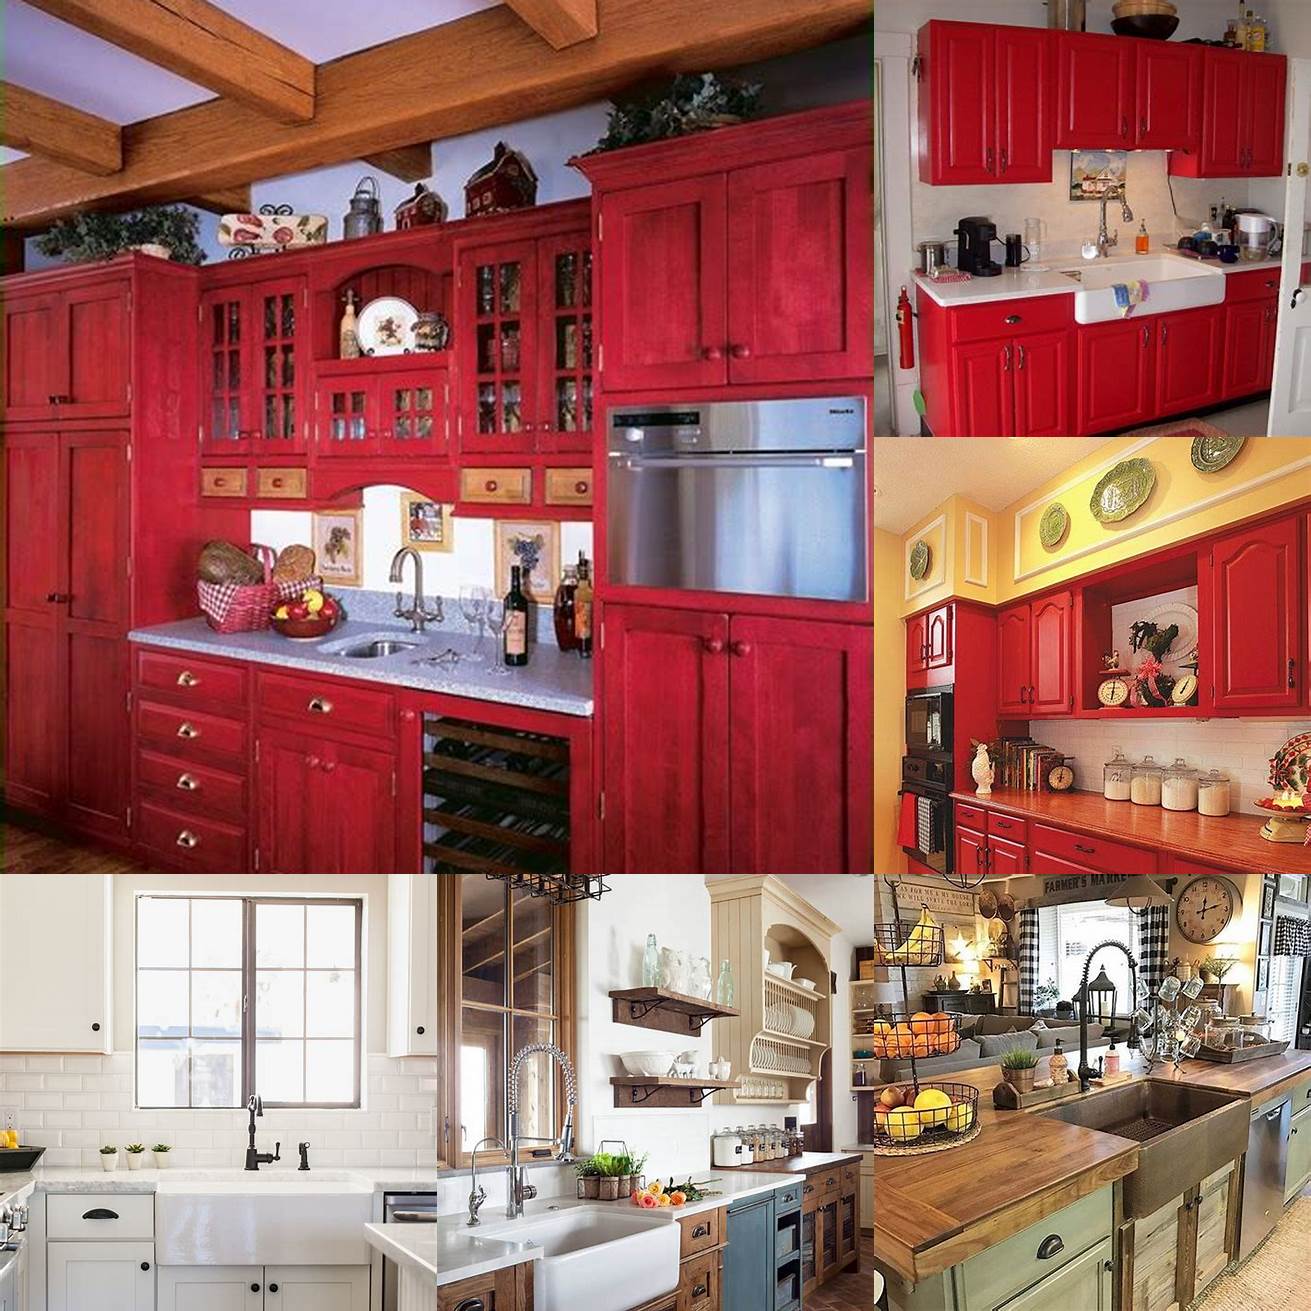 Red kitchen cabinets paired with a white farmhouse sink and open shelving